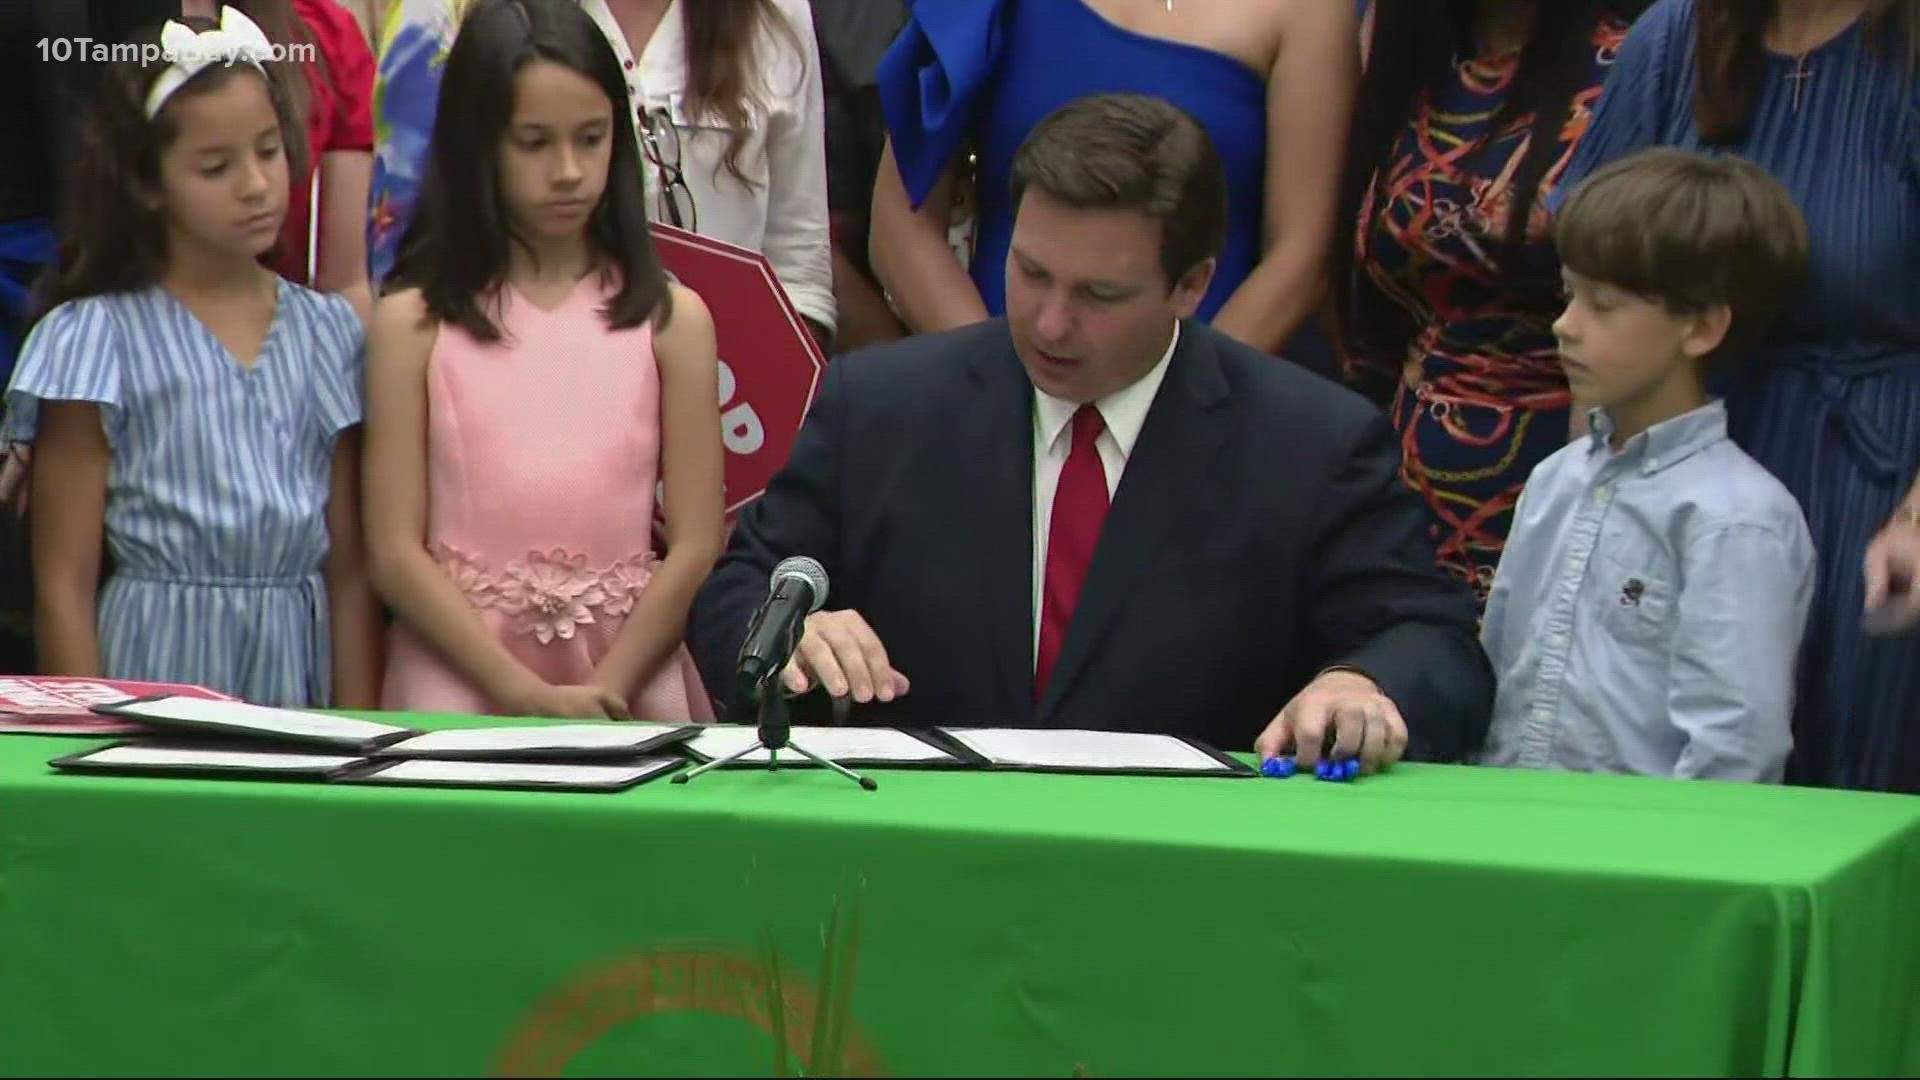 “We’re here today because we believe in education, not indoctrination," DeSantis said at a press conference Friday in Hialeah Gardens.